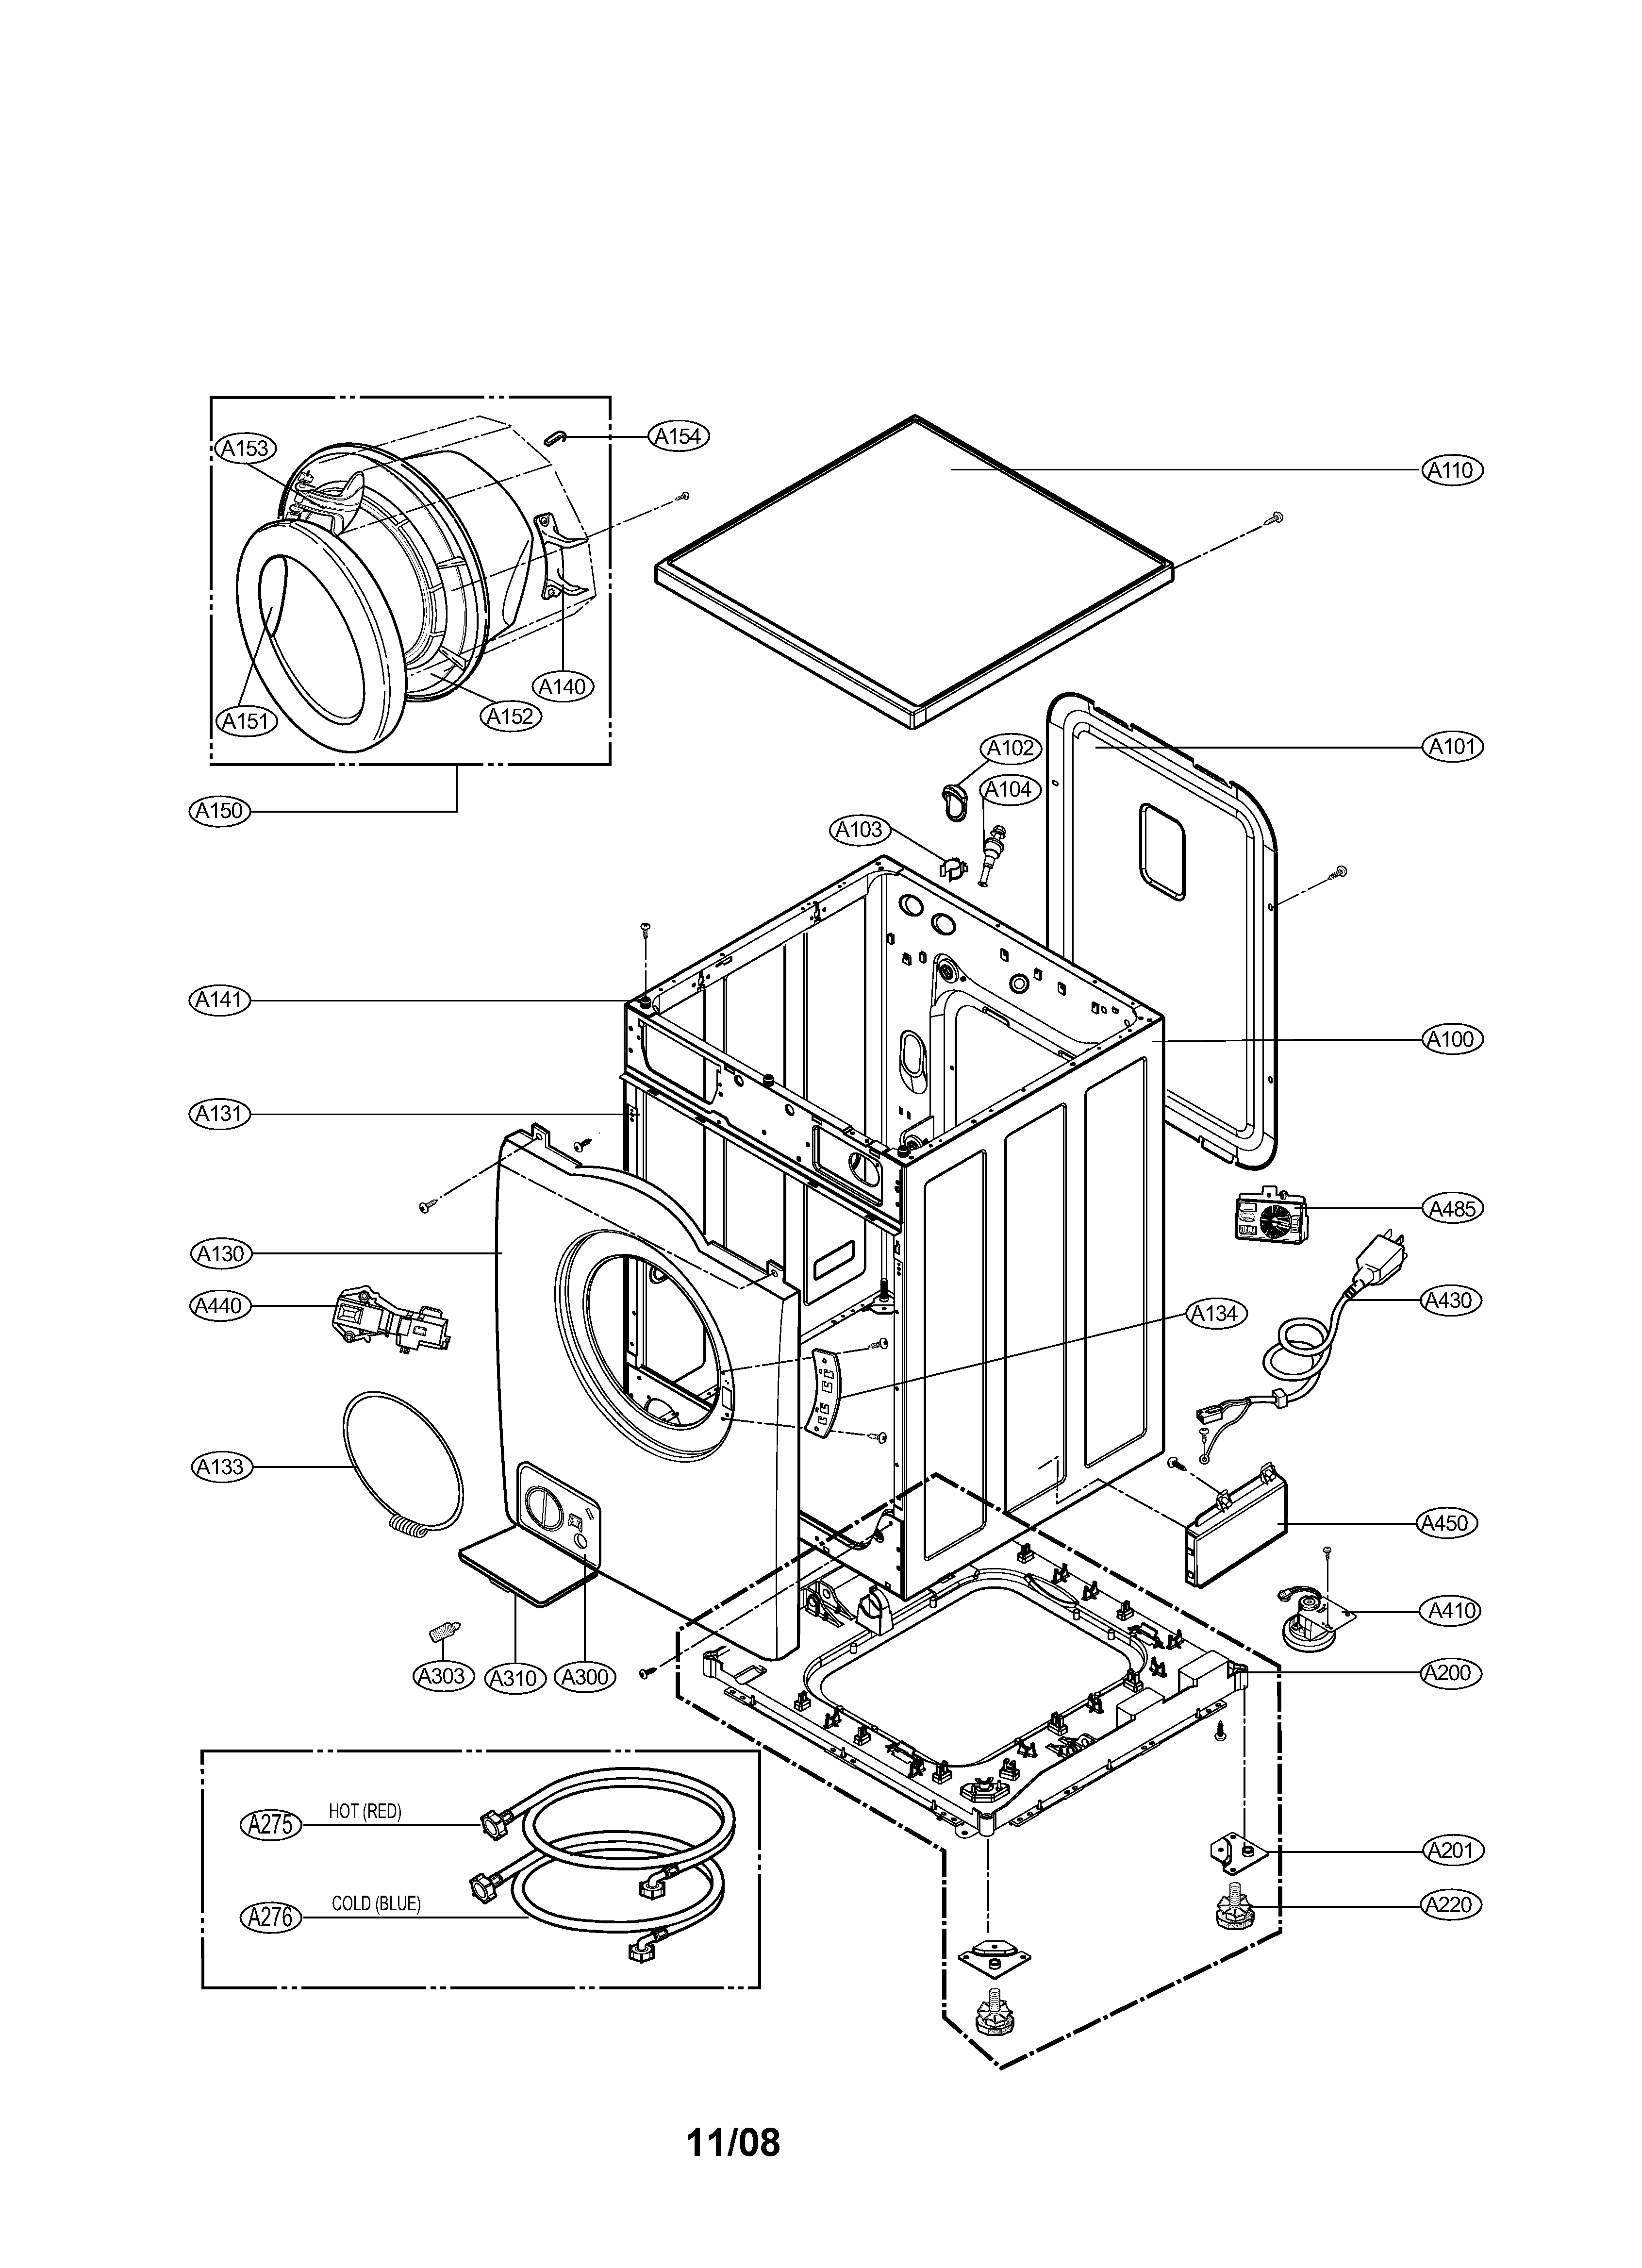 31 Lg Front Load Washer Parts Diagram